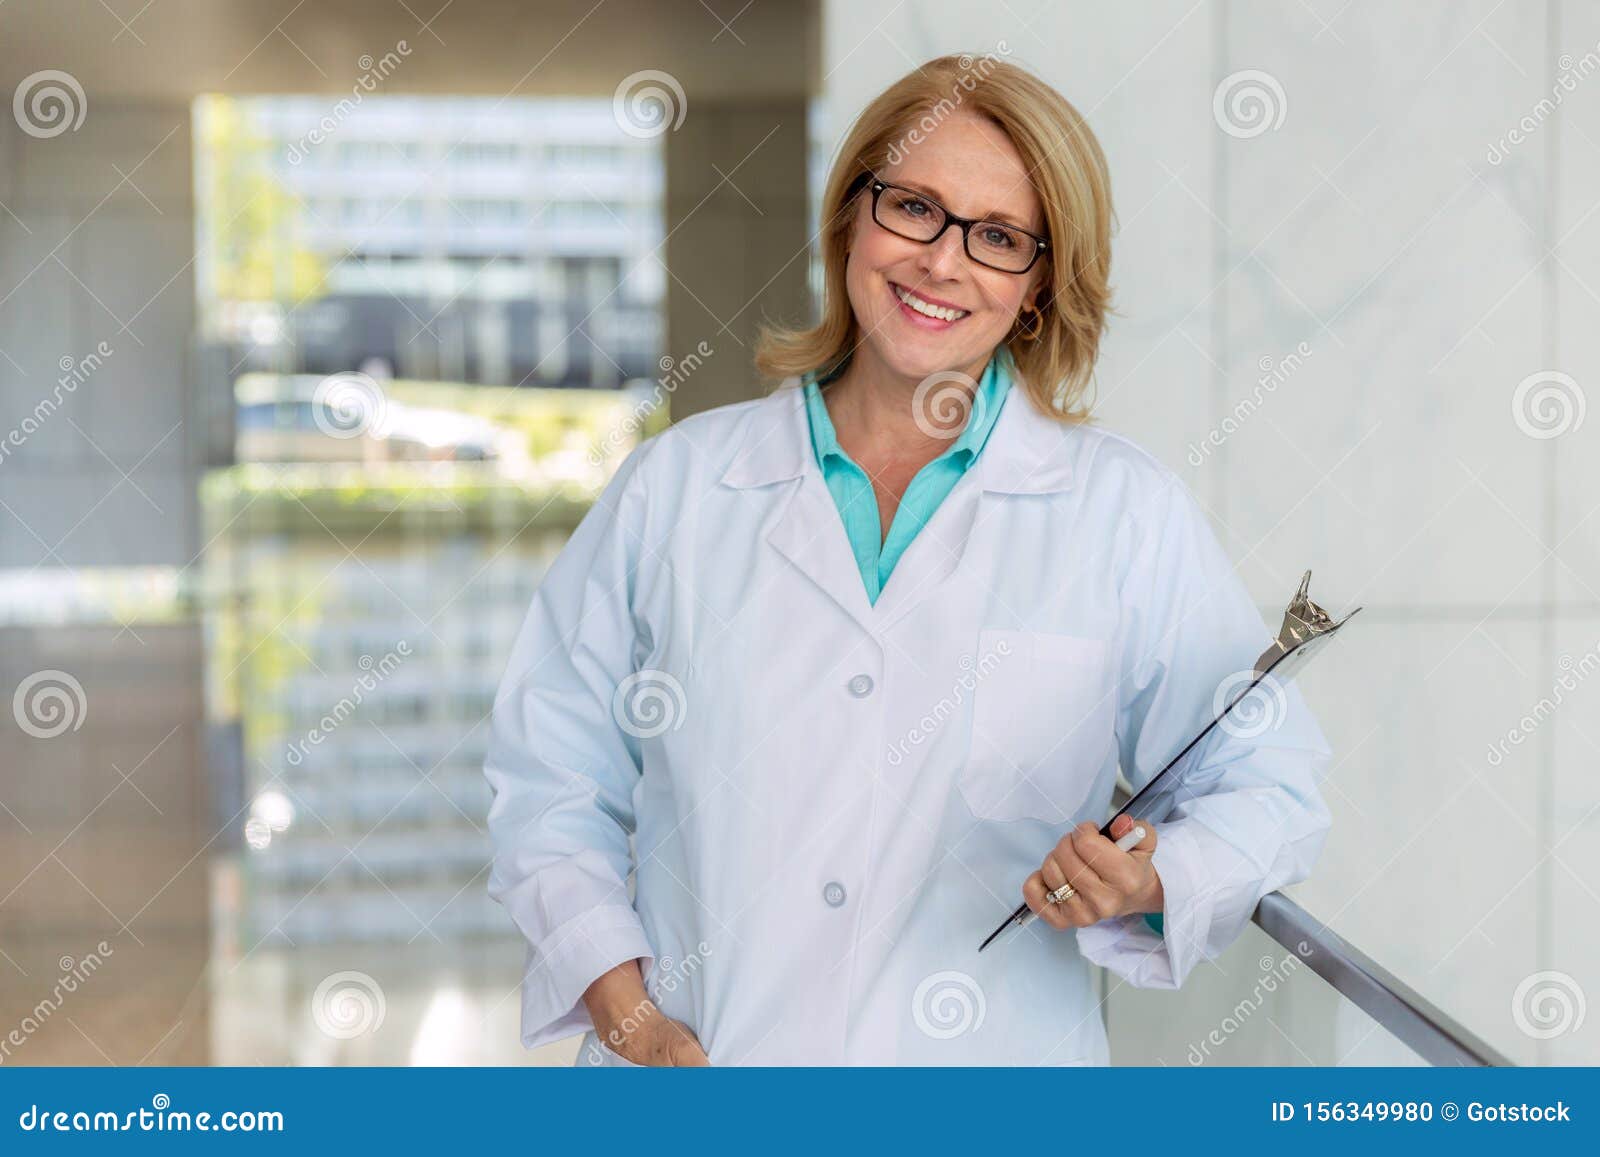 portrait of a mature female medical staff doctor at hospital, genuine warm smile, qualified practitioner, experienced physician